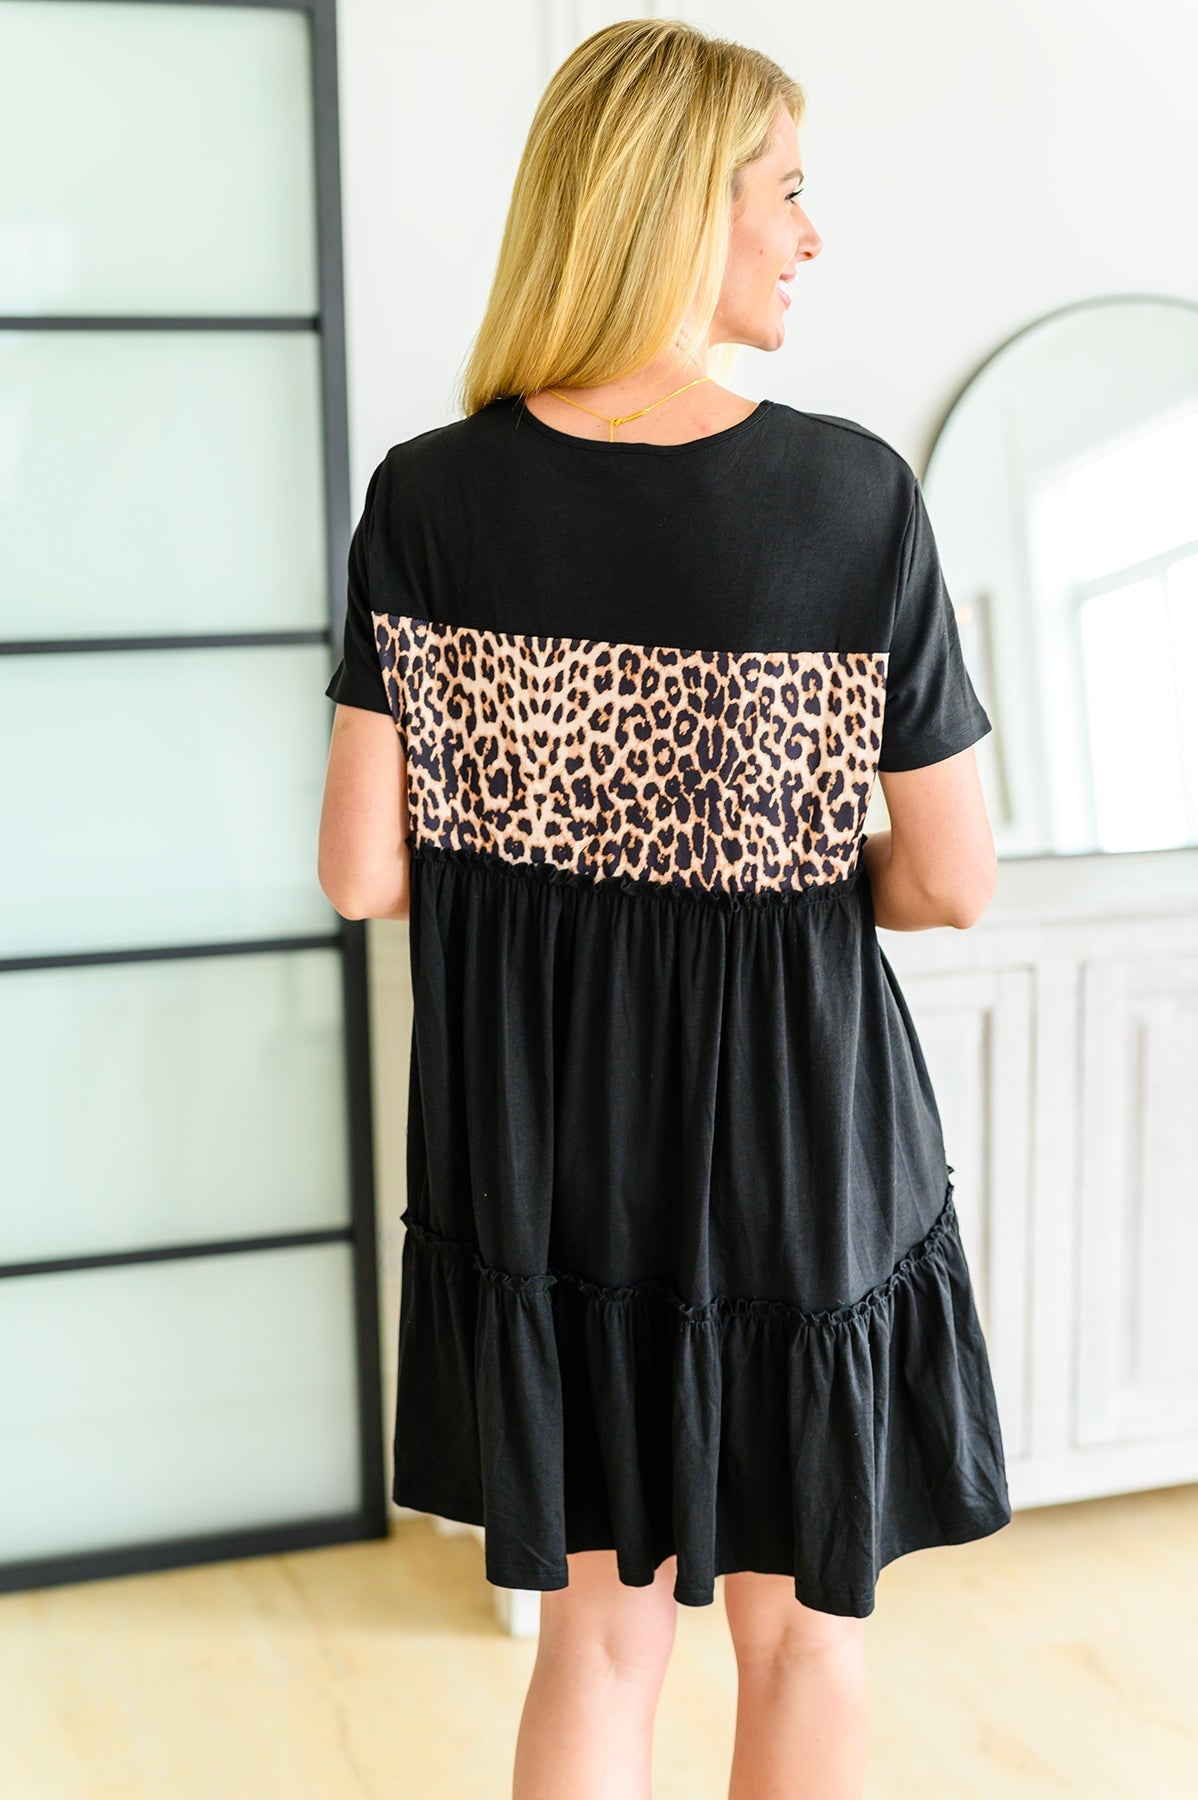 Tiered Leopard Dress in Three Colors - Womens